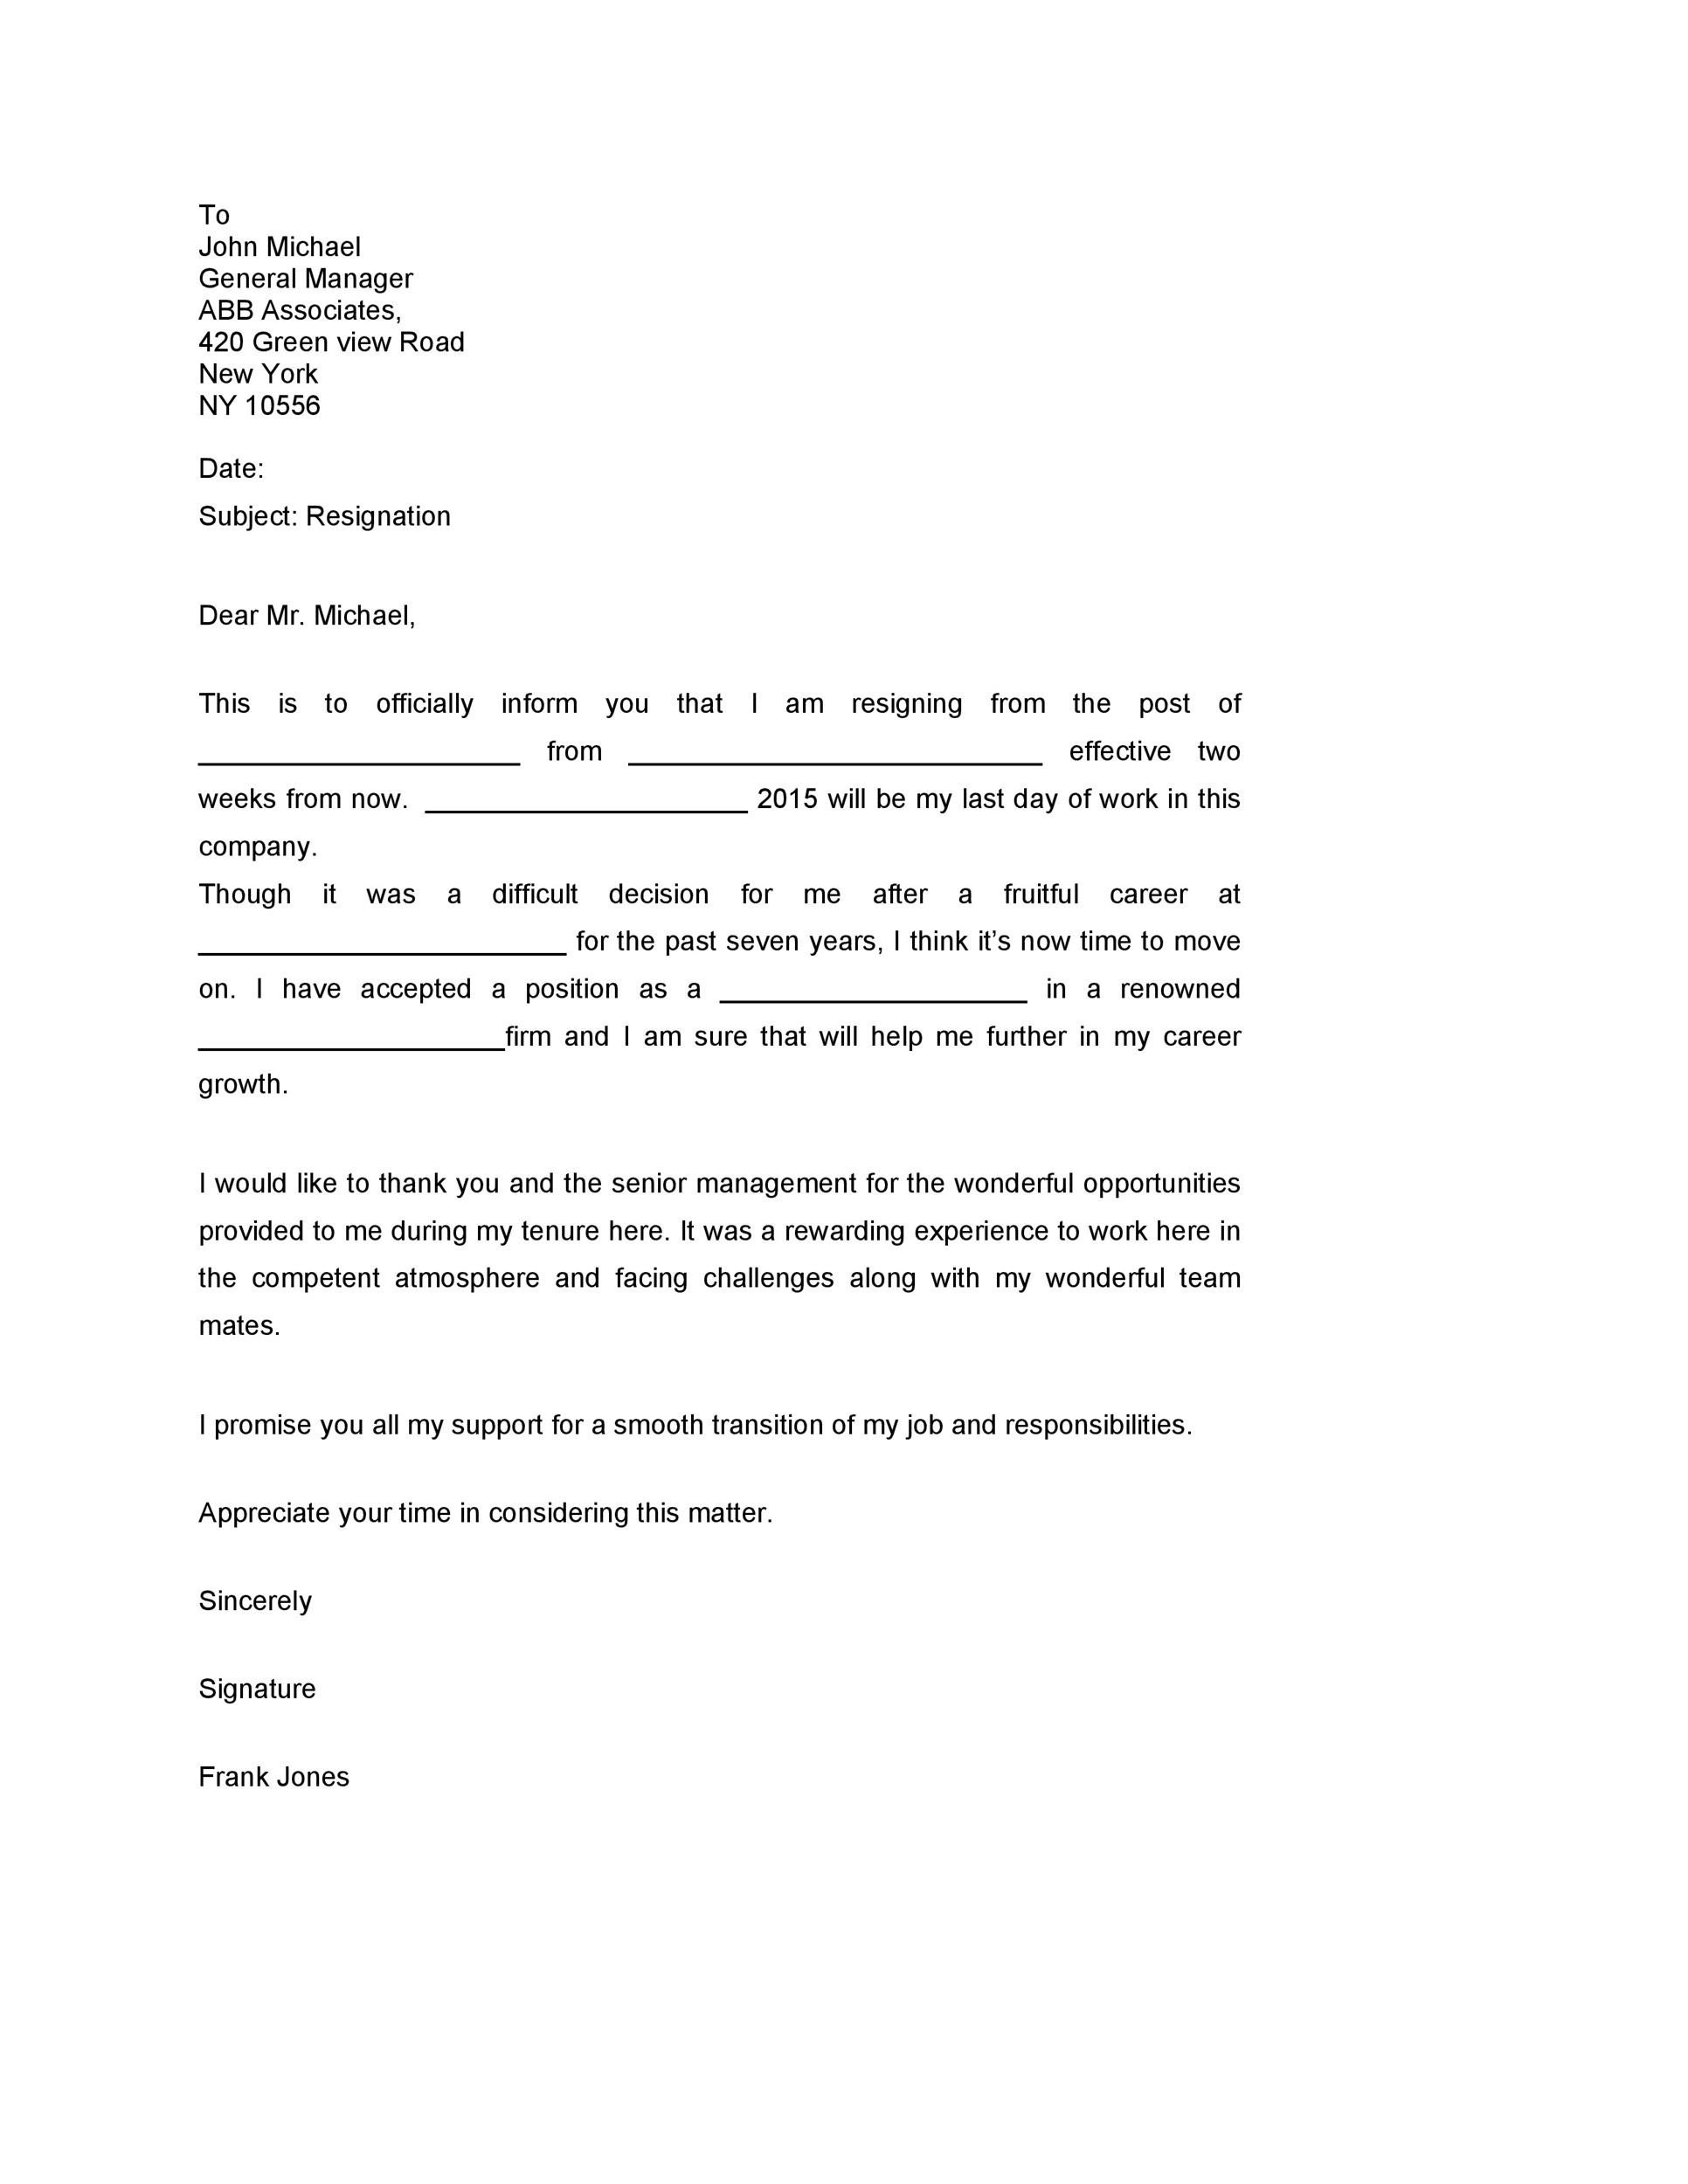 Resignation Letter Due To Lack Of Growth Opportunity from templatelab.com